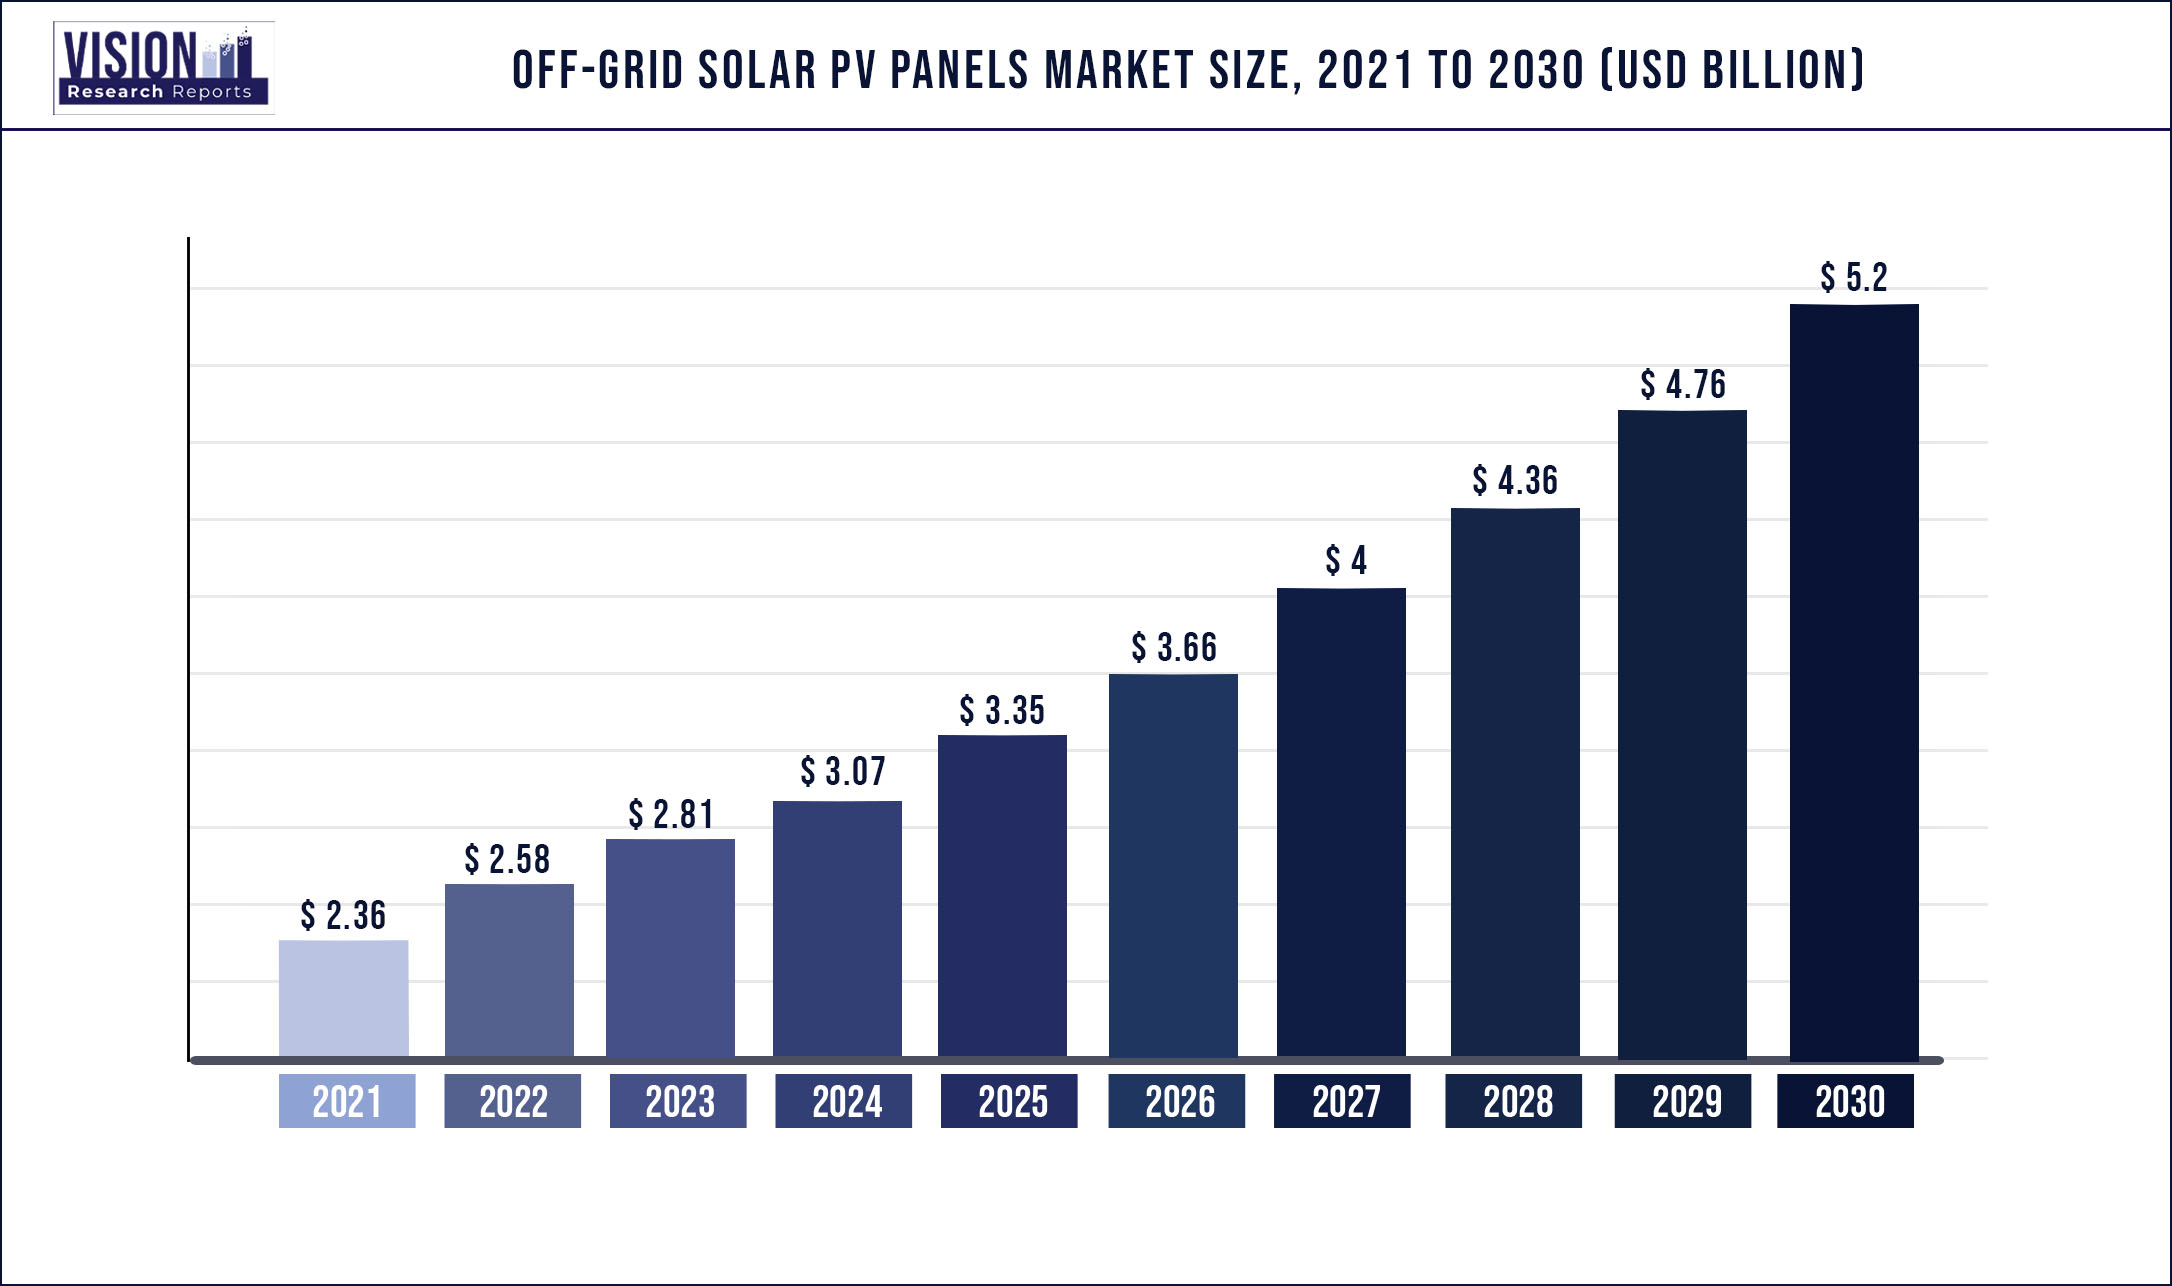 Off-grid Solar PV Panels Market Size 2021 to 2030